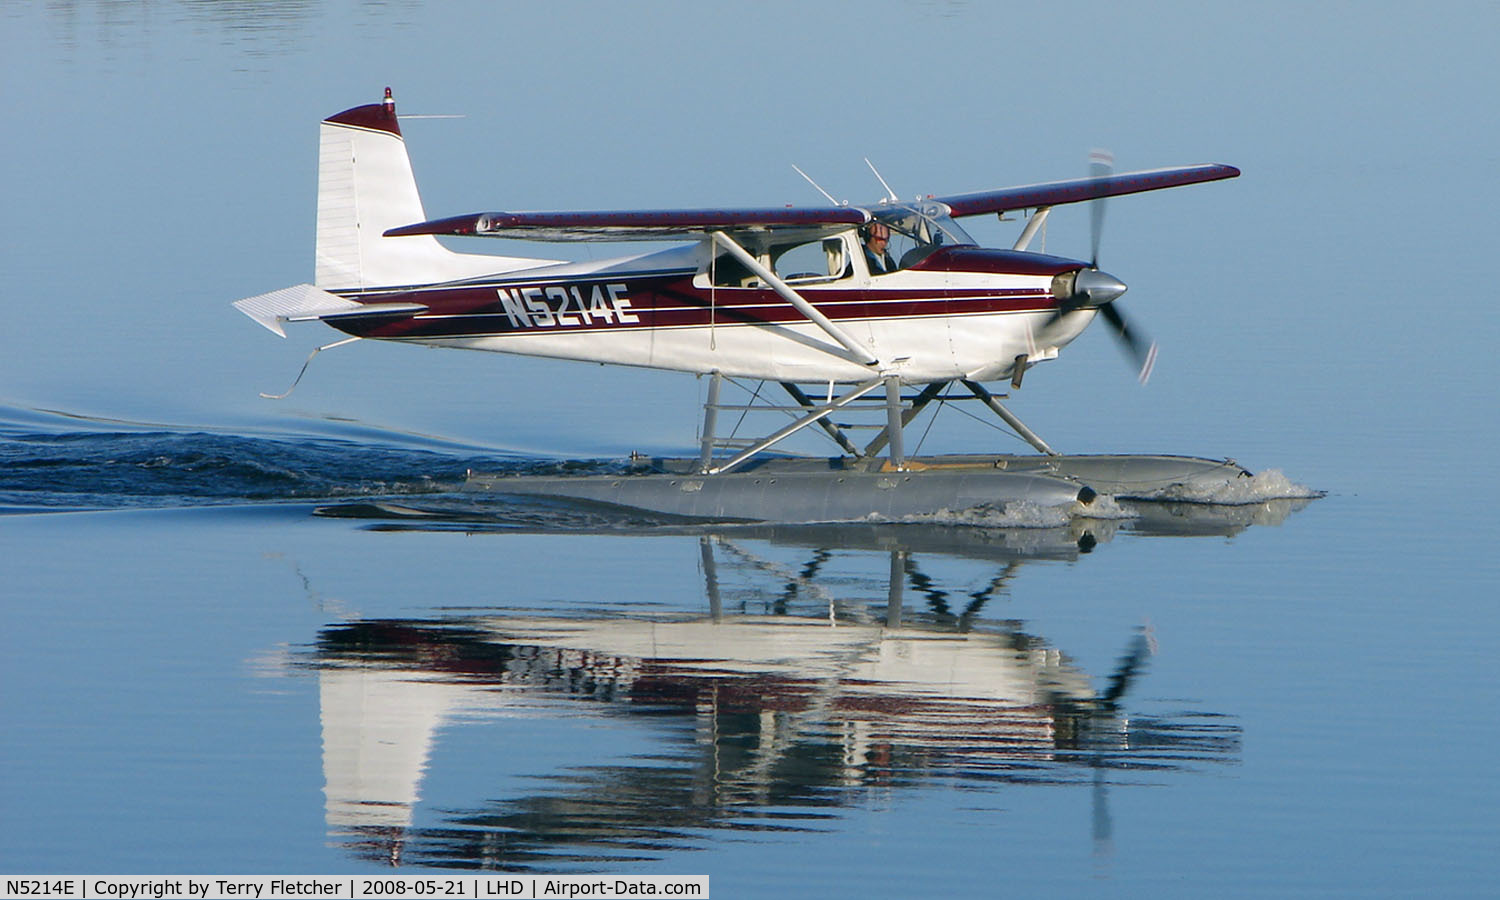 N5214E, 1959 Cessna 180B C/N 50514, A beautiful mirror image as this Cessna 180B makes an early morning departure from Lake Hood